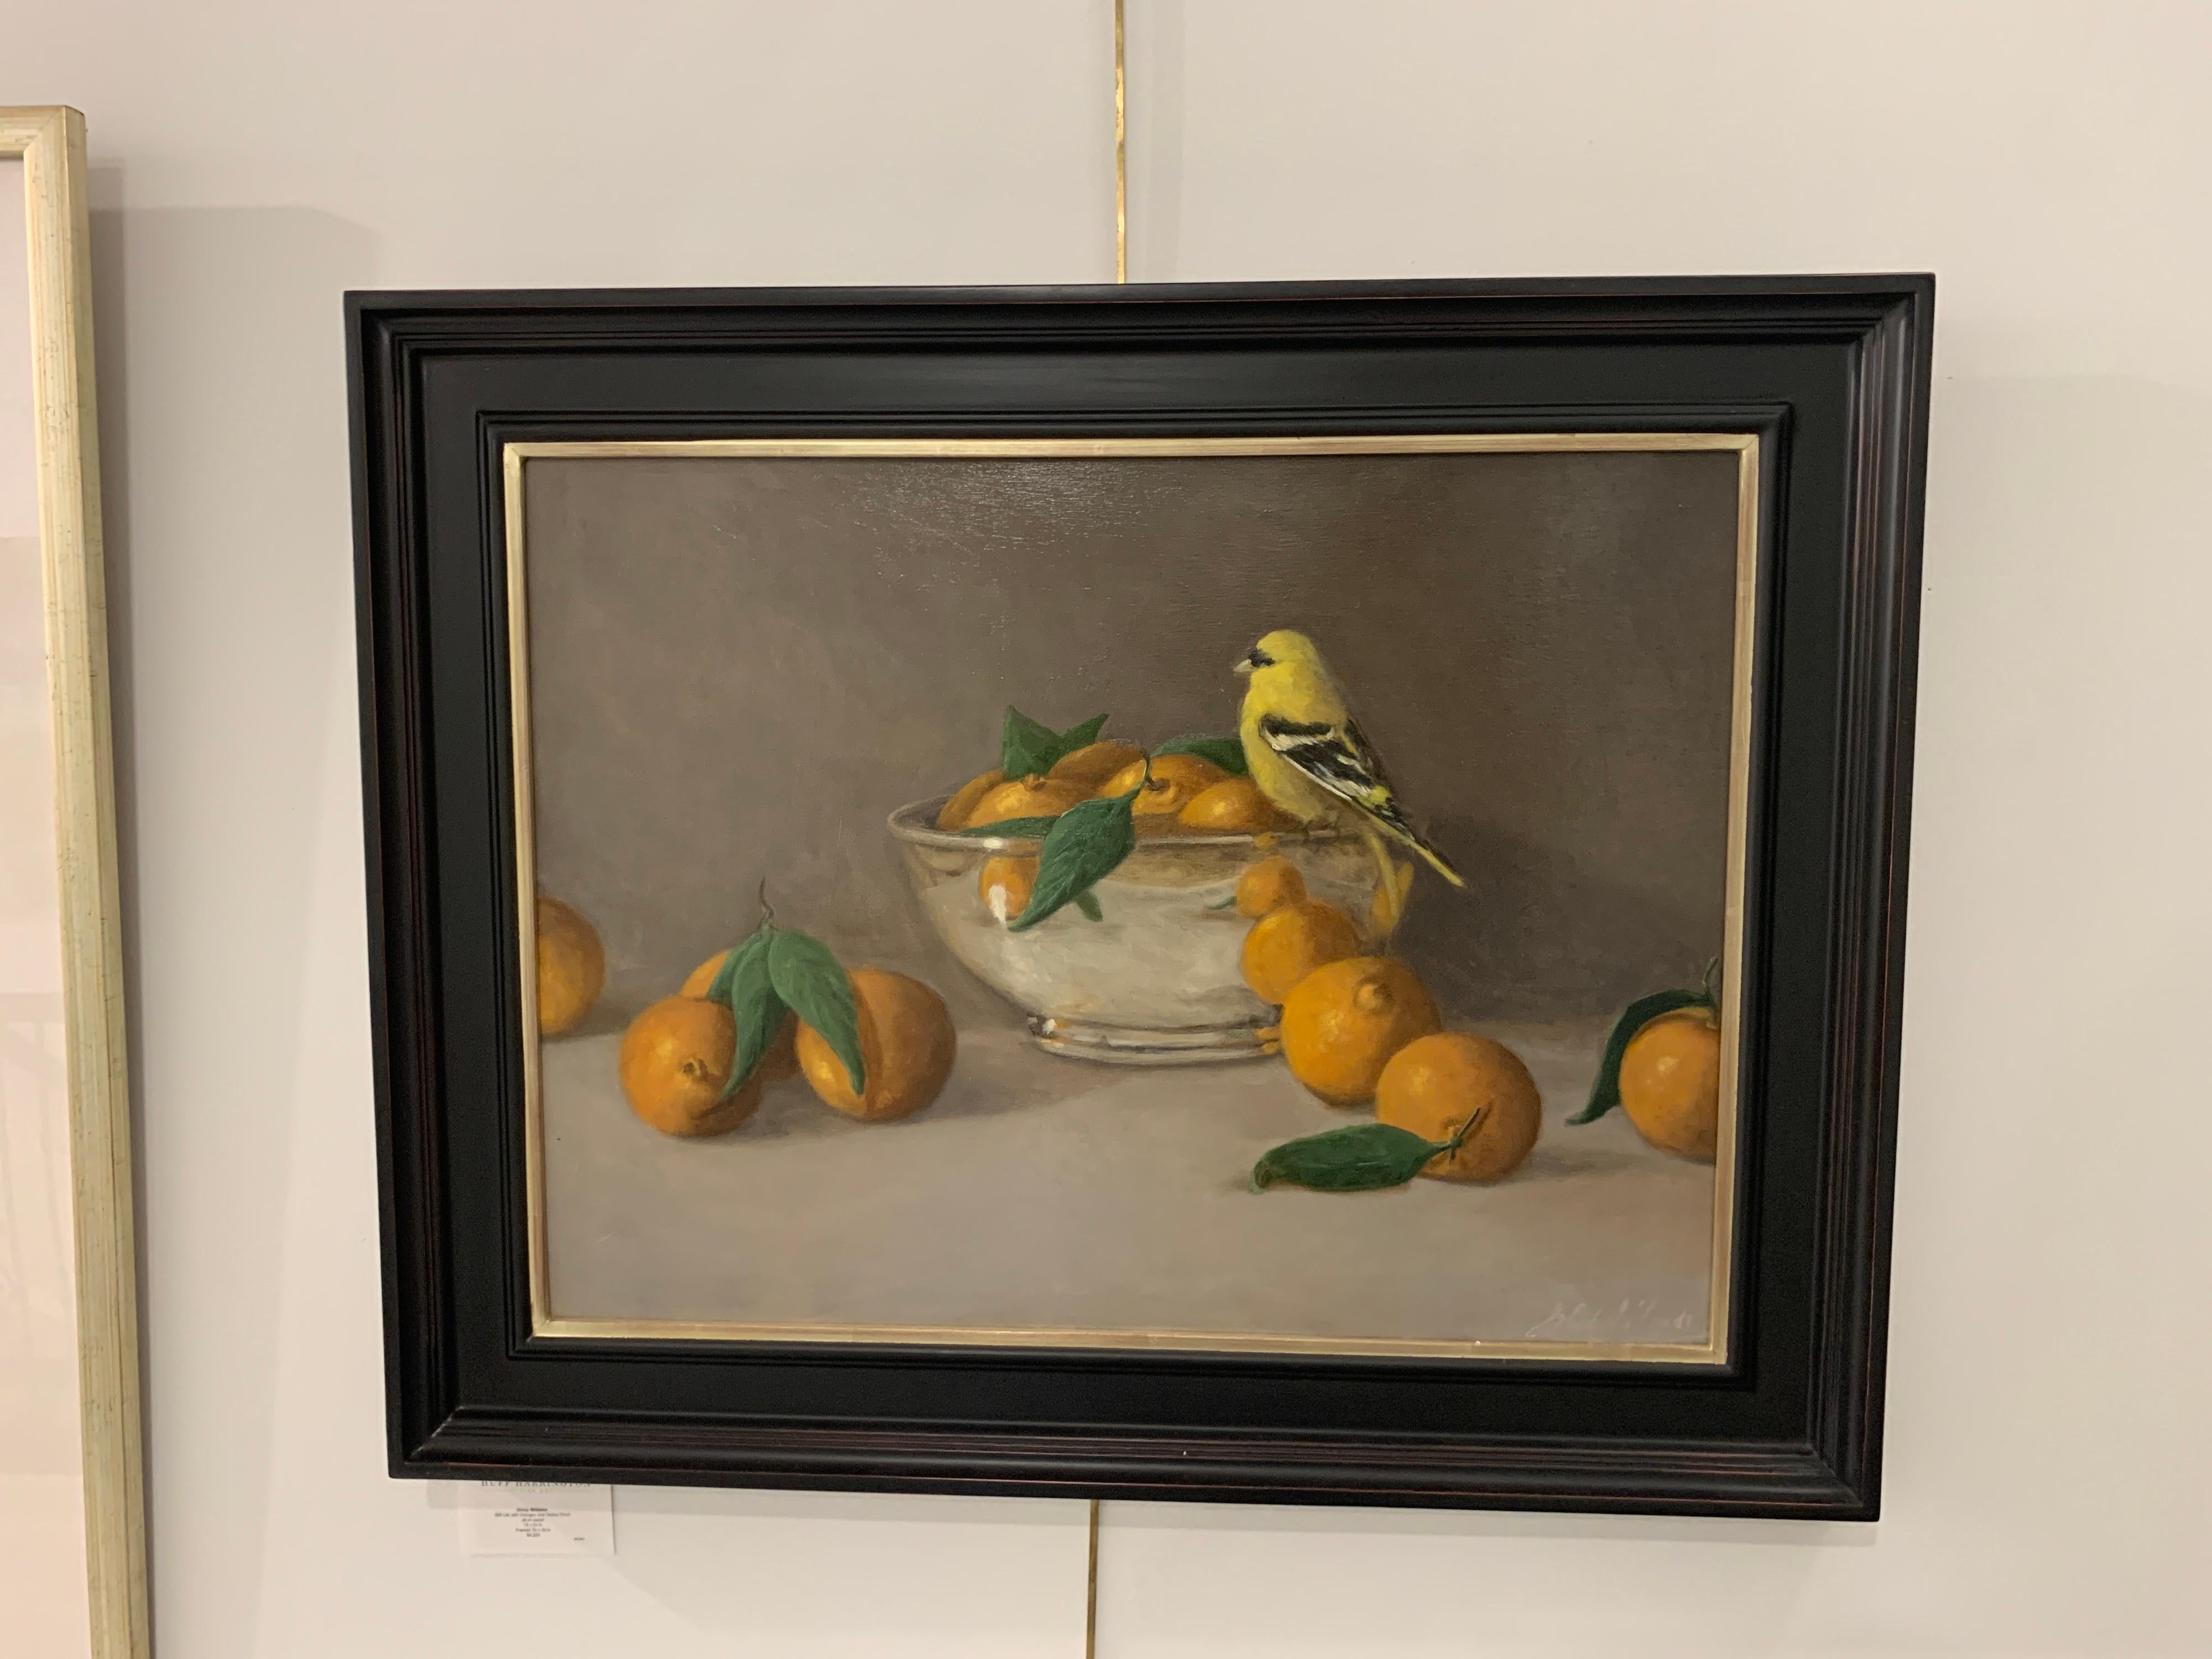 Set inside a gilt molded frame, this oil on linen still-life painting is signed lower right. Without its frame, it measures 18 x 24 inches.

We were immediately drawn to the thoughtfully painted work, the clever titles and the rich, deep hues. And